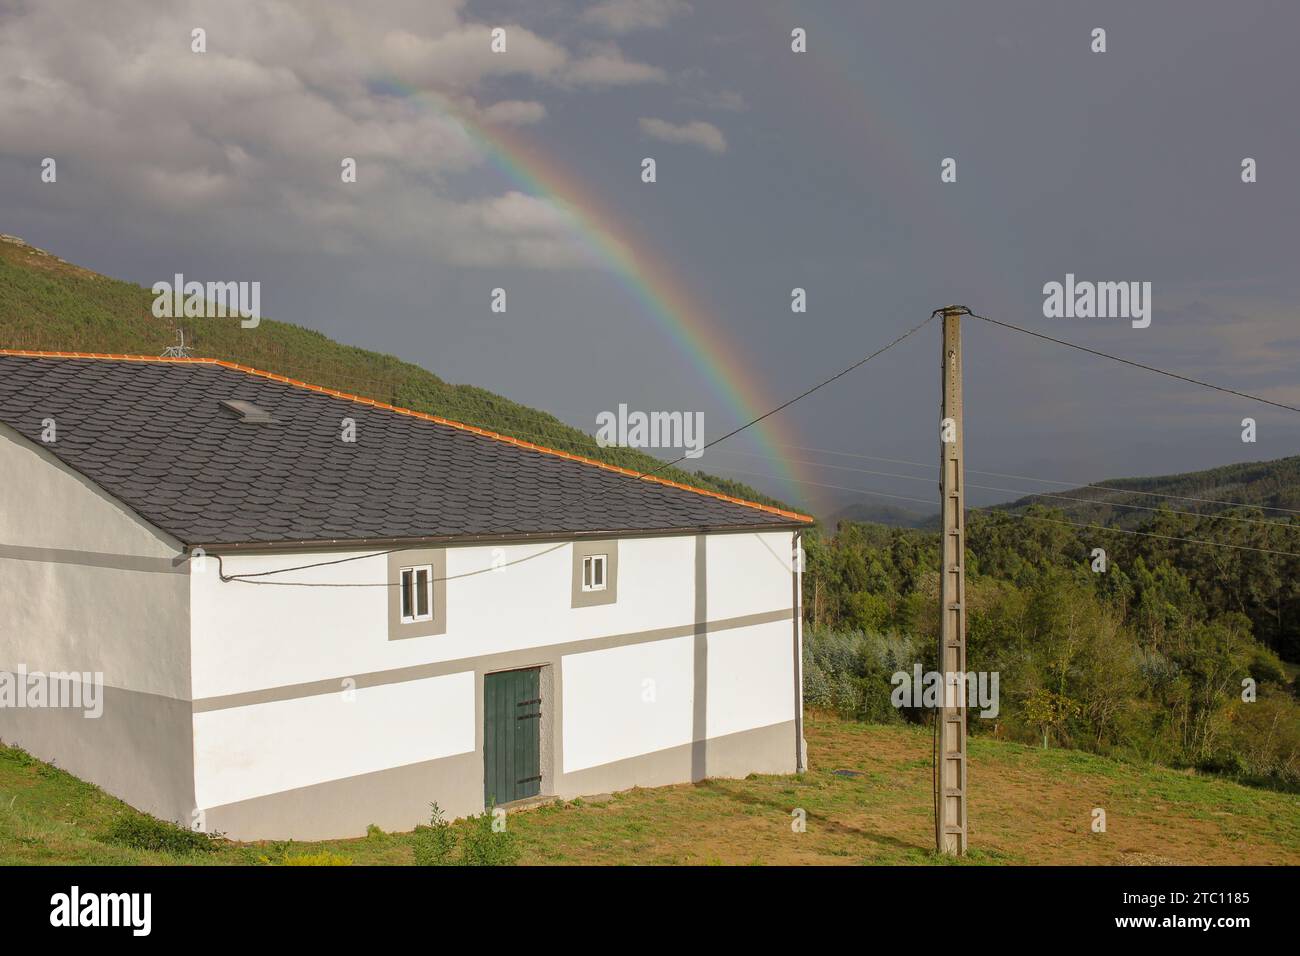 rainbow over a house in the mountains in Galicia, Spain Stock Photo